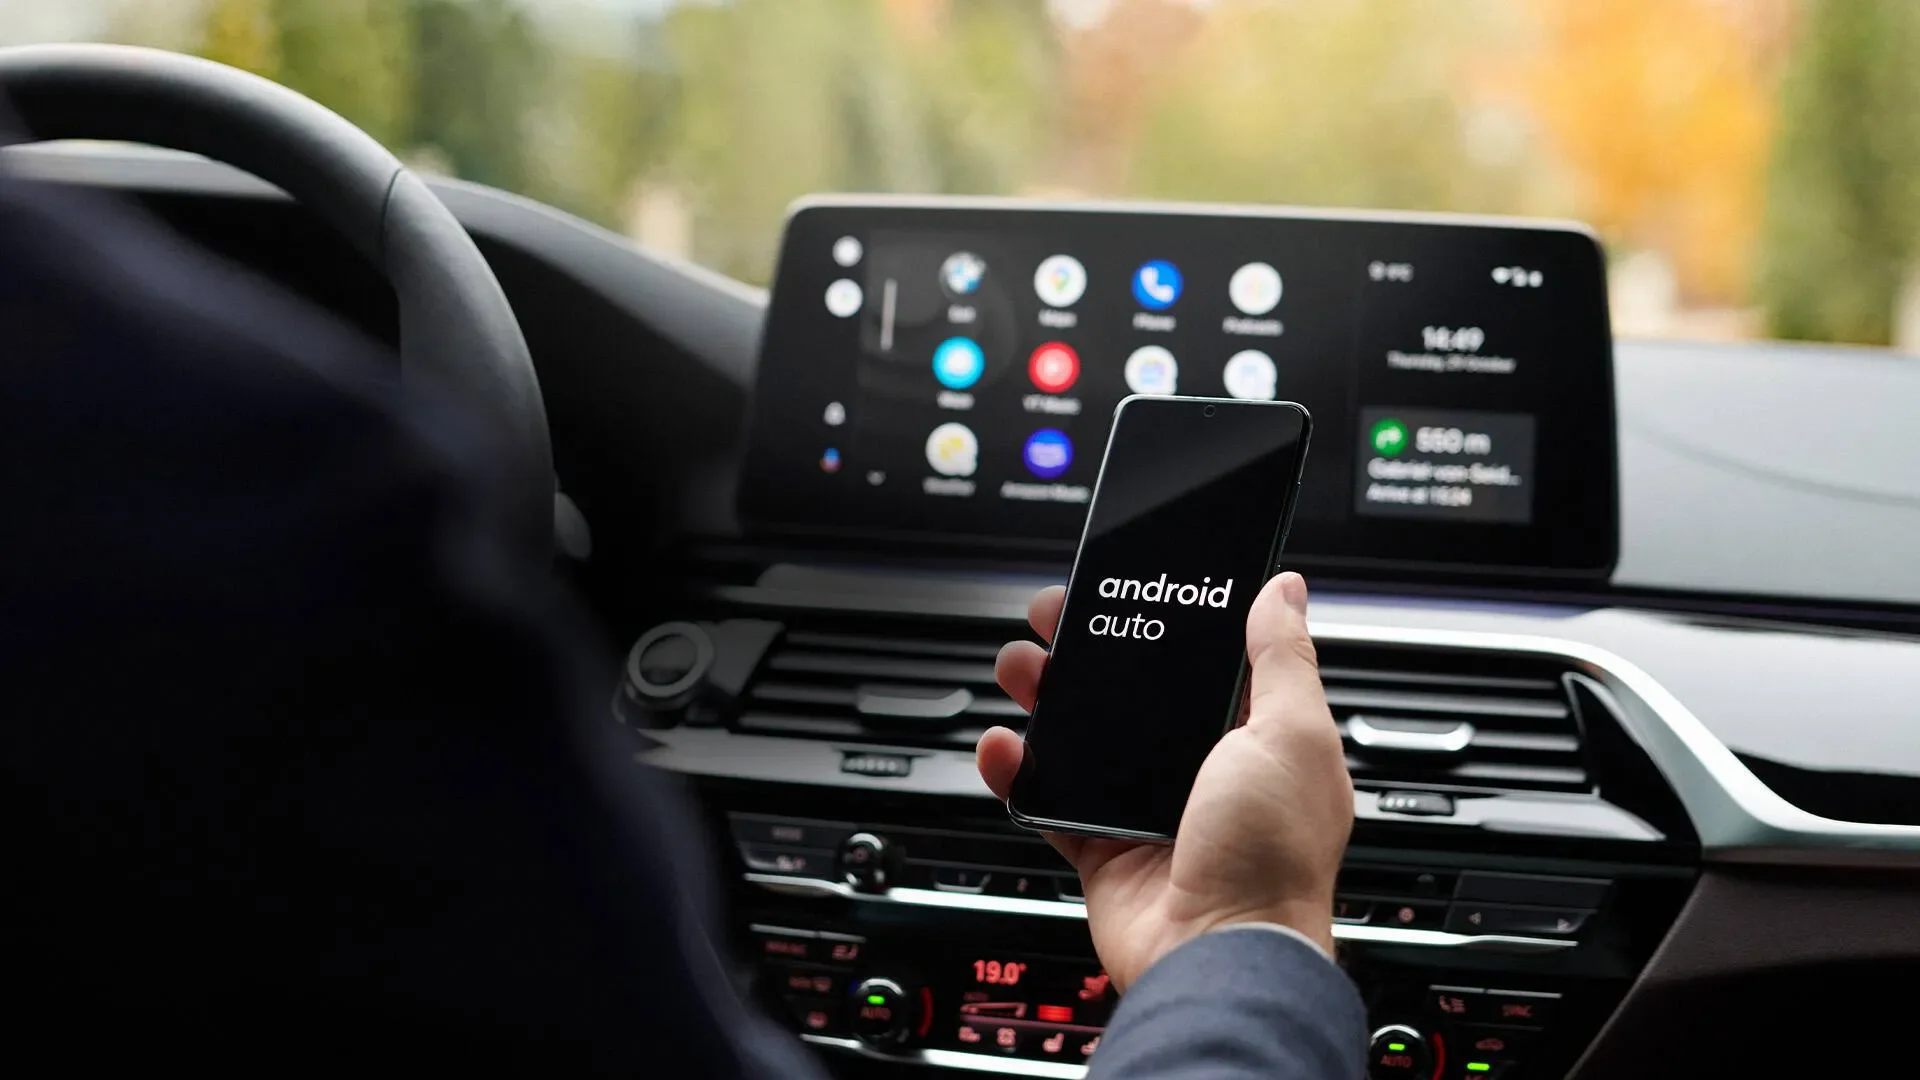 Android Auto for smartphones will be forgotten